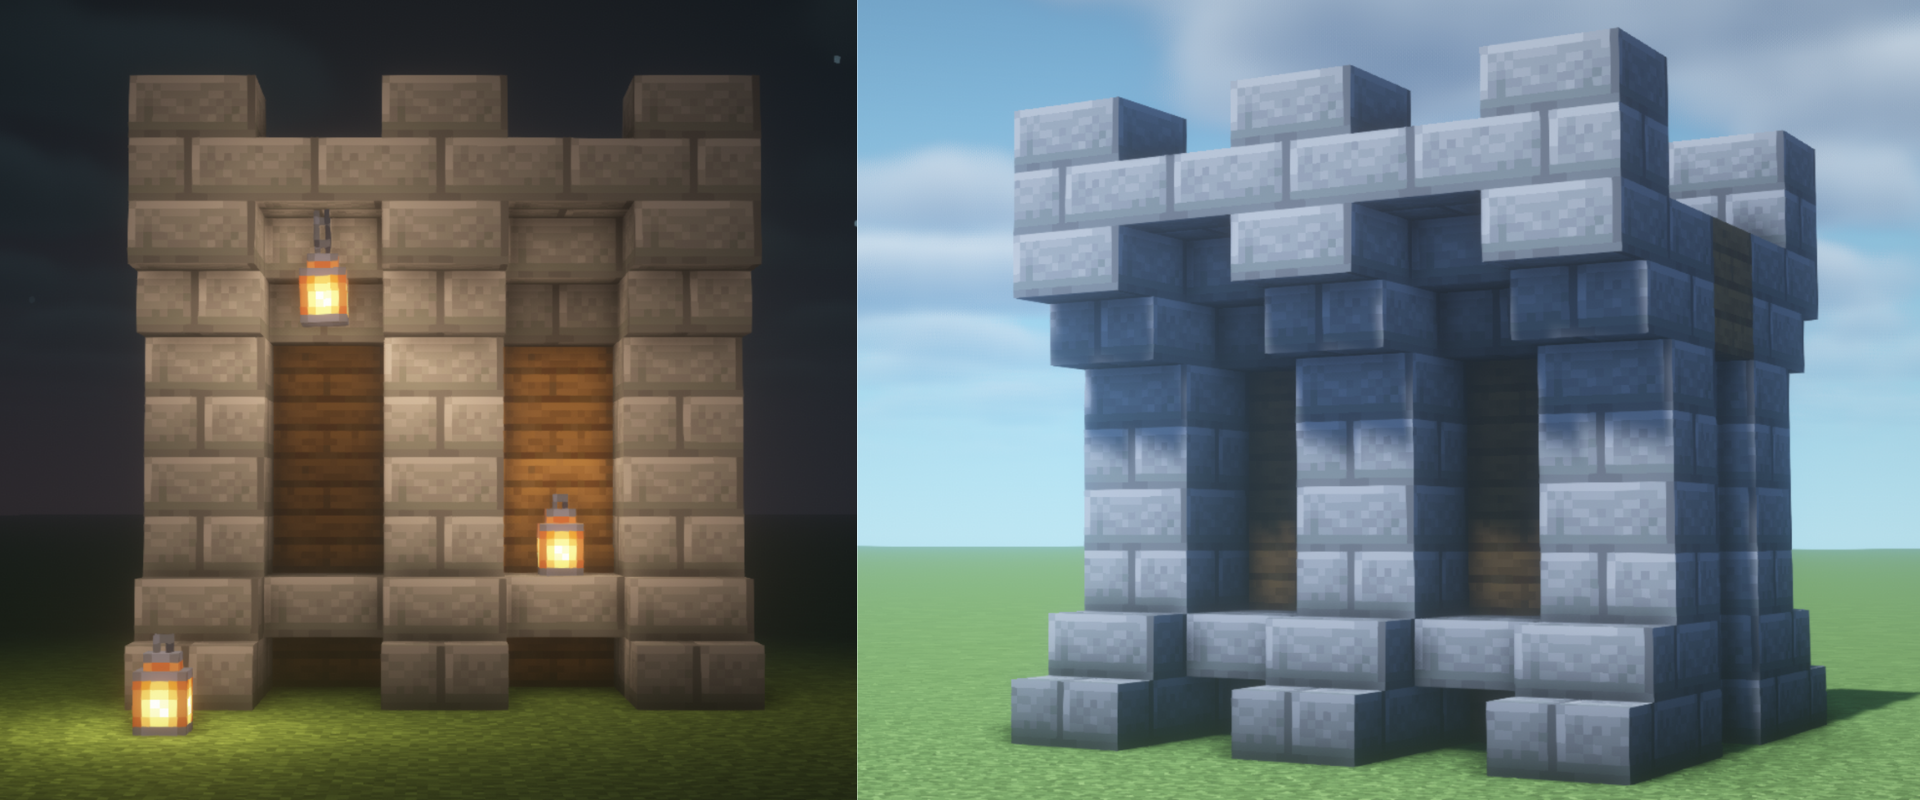 How to Build a Medieval Style Wall in Minecraft